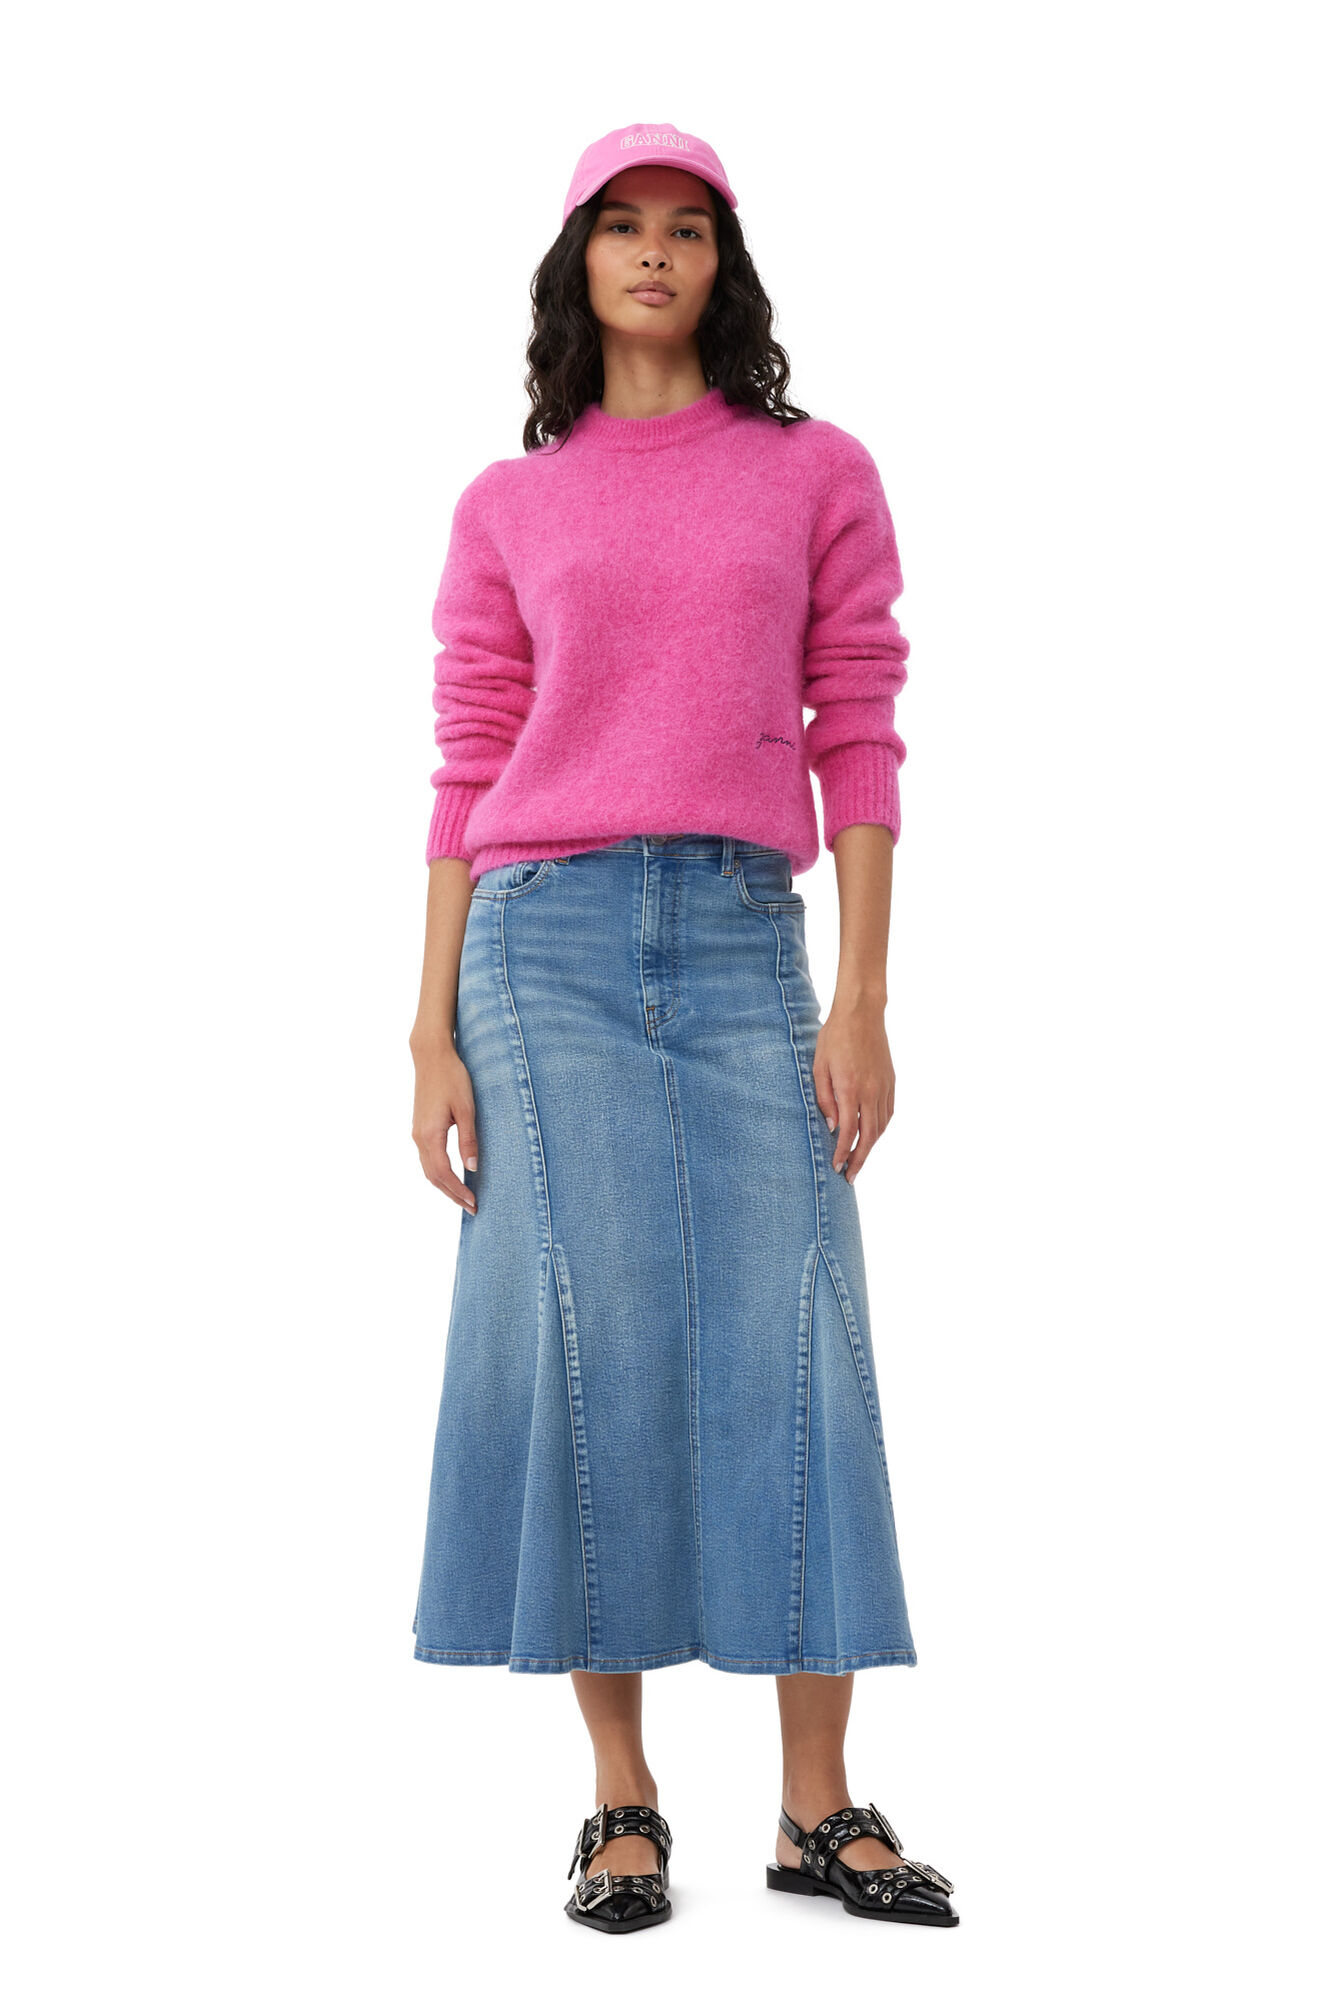 GANNI Brushed Alpaca Pullover in Pink S